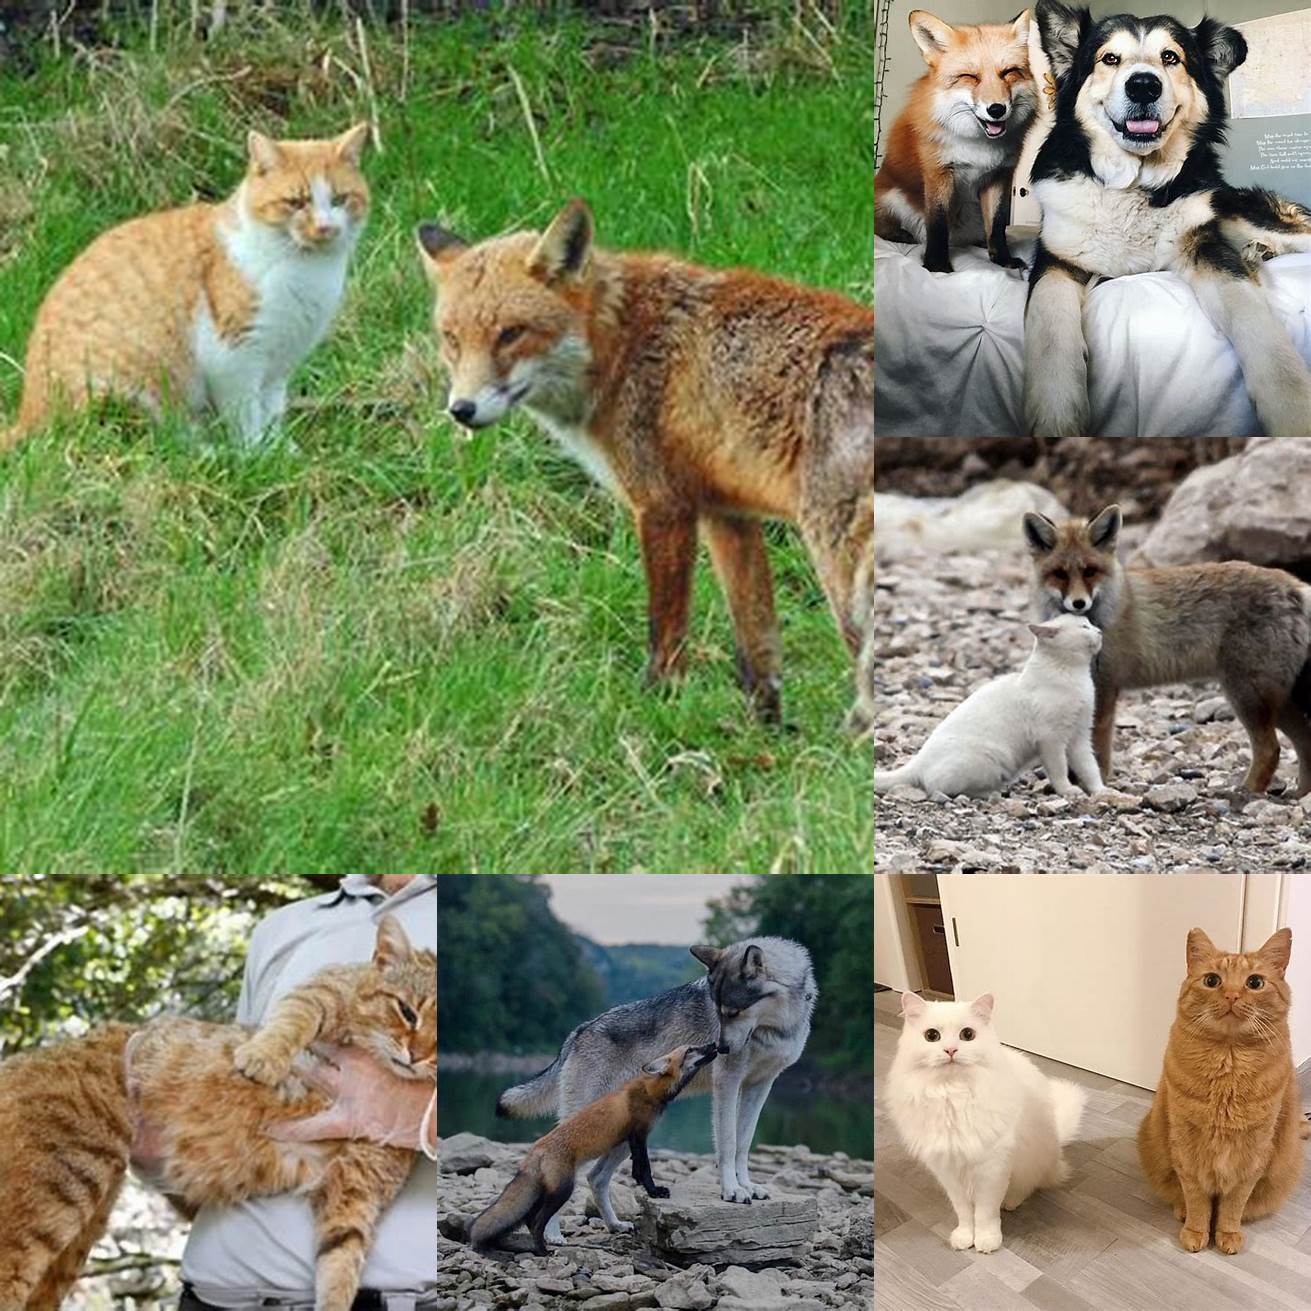 A picture of a cat and a fox sitting next to each other